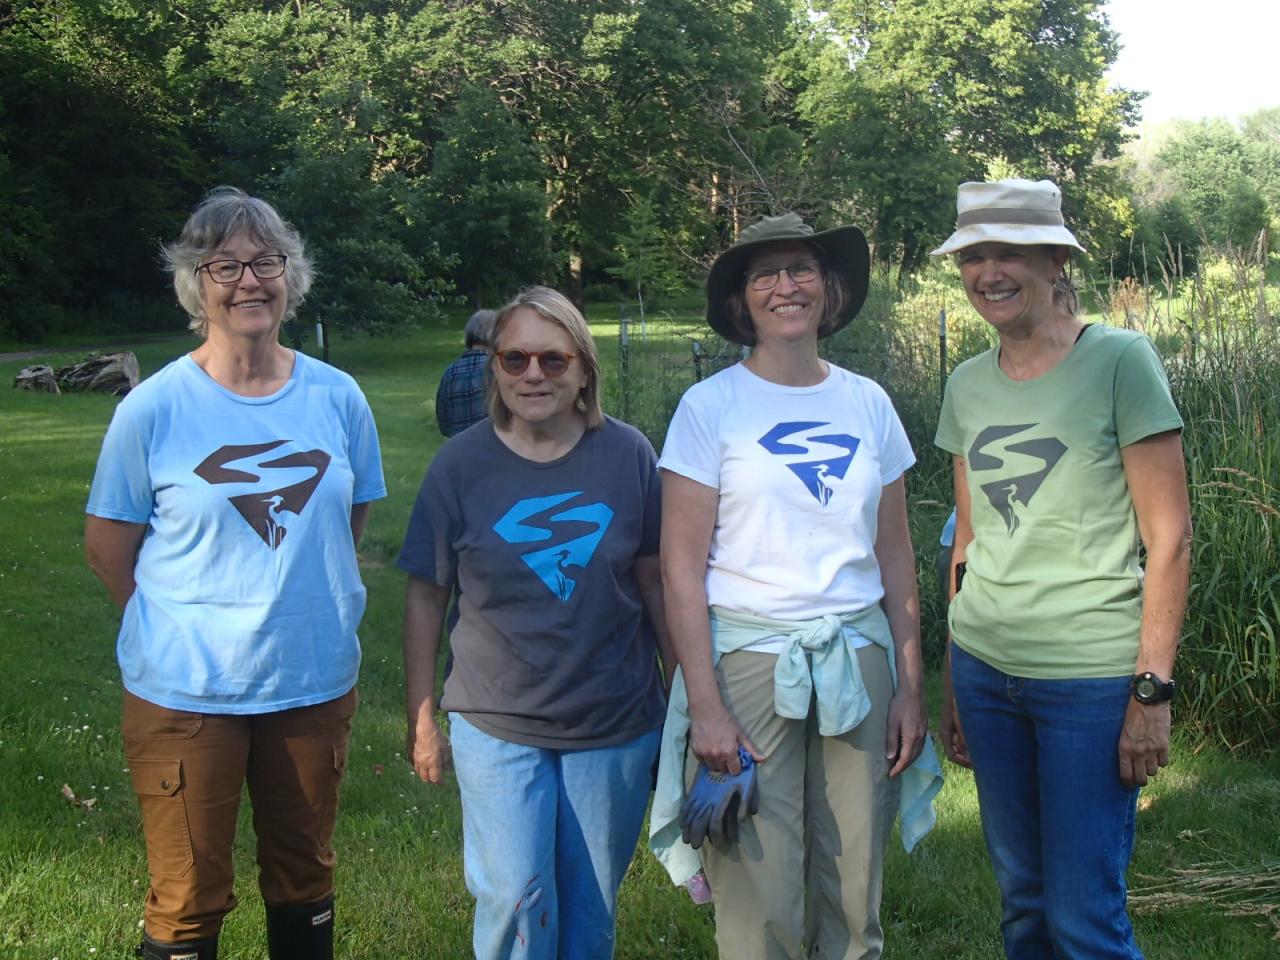 Four different versions of the SuperVolunteer shirt on display at the 2019 Crosby Farm Park tending